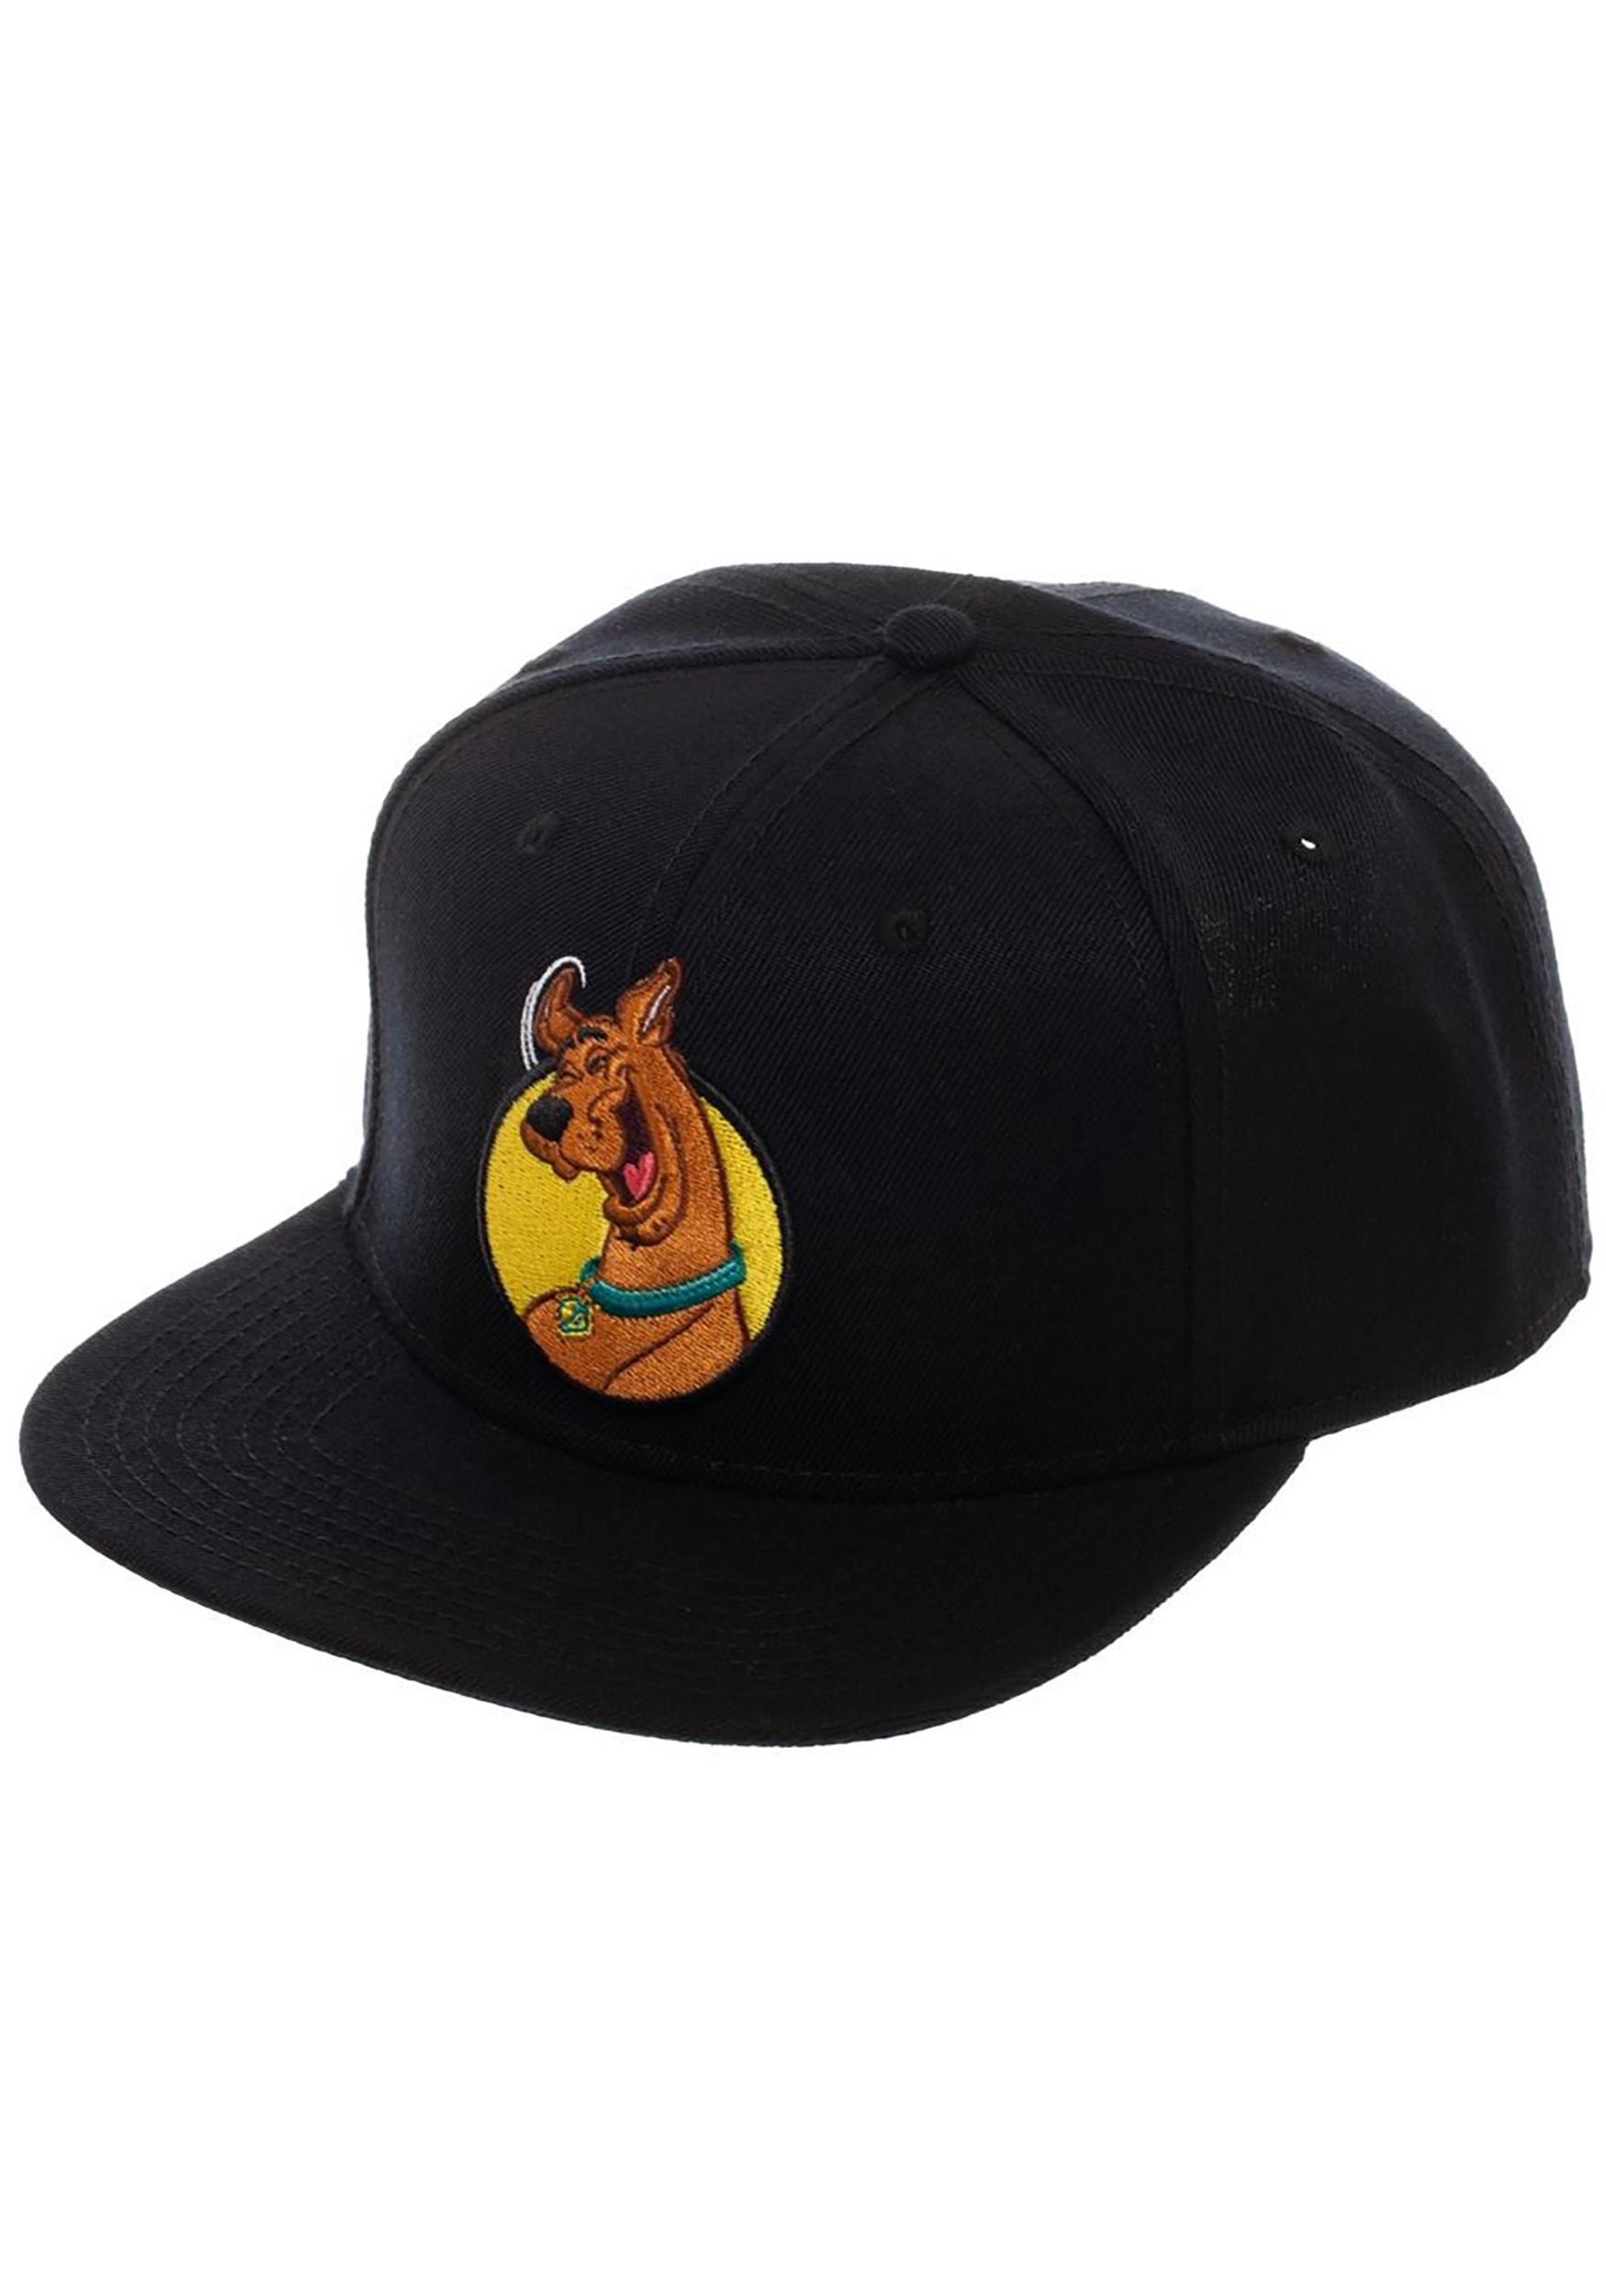 Laughing Scooby Doo Black Snapback Hat